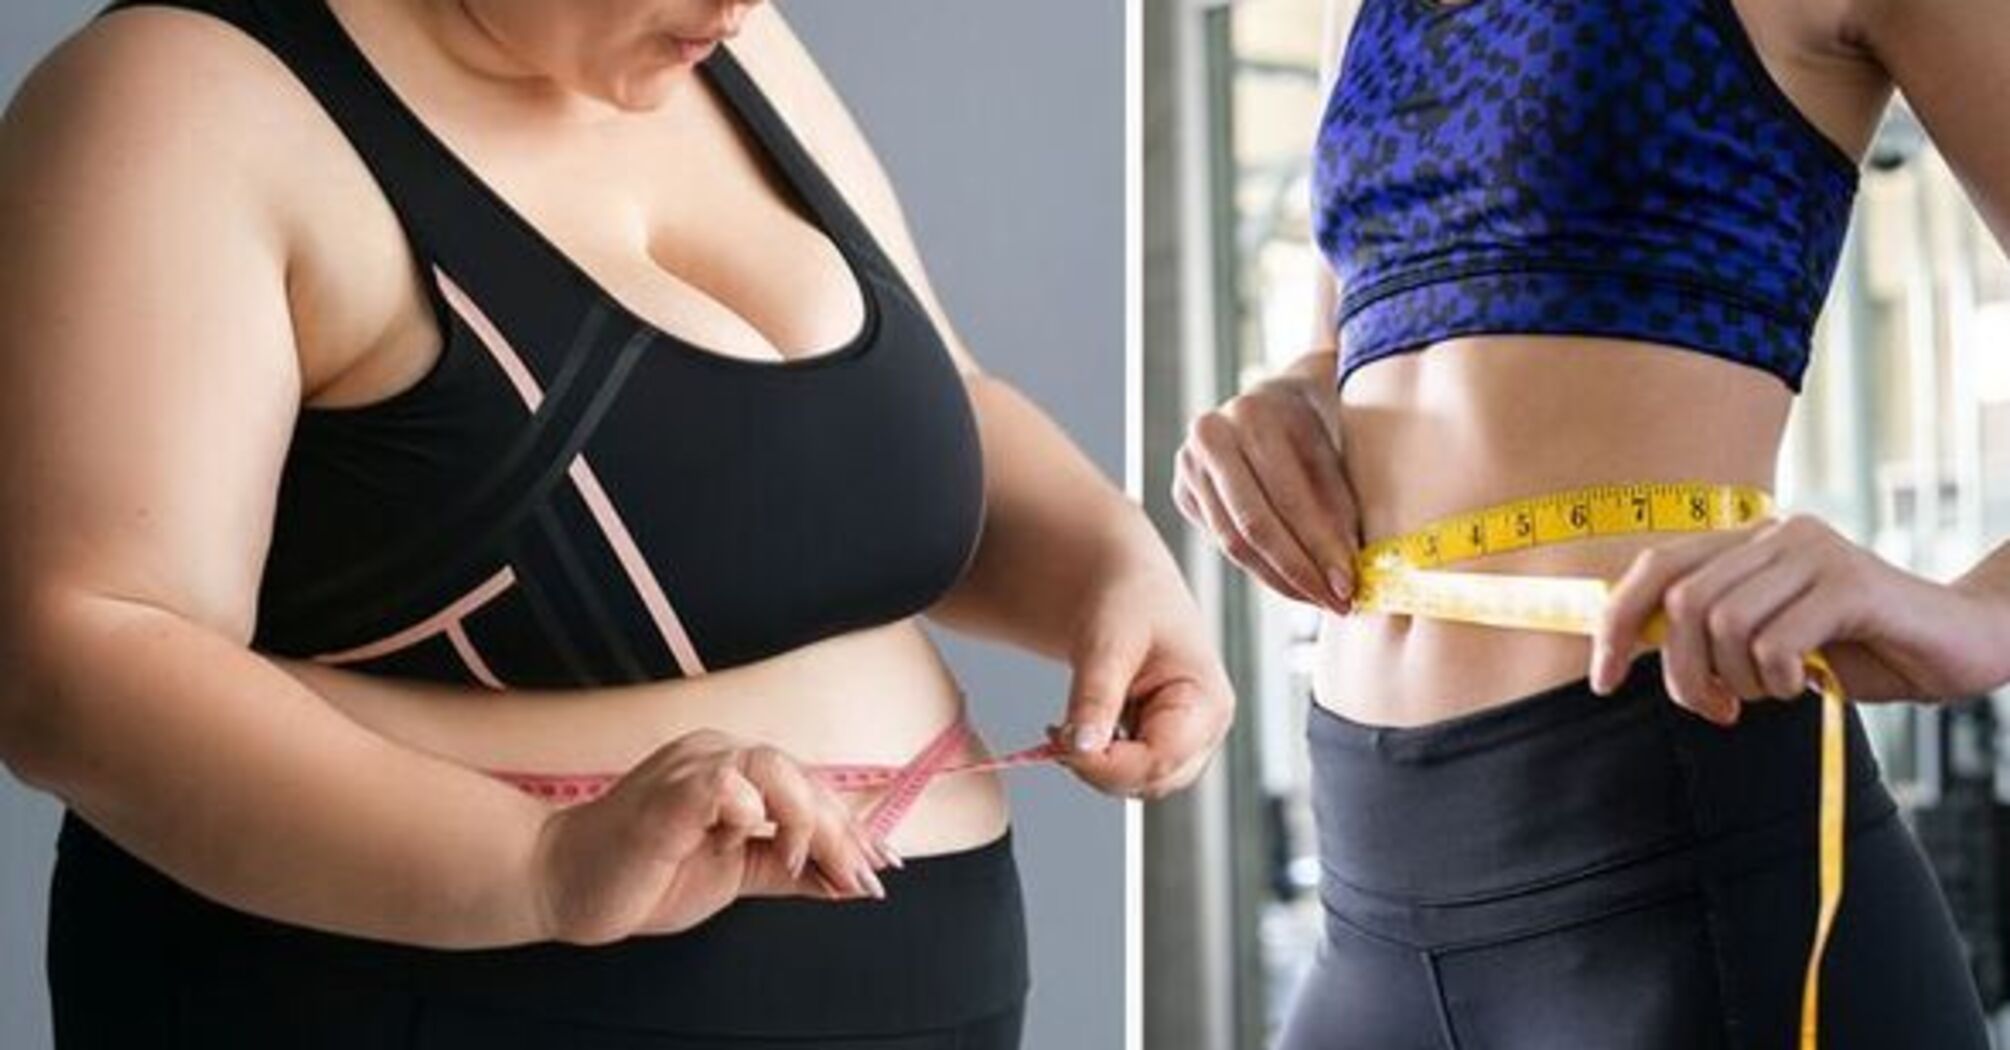 How to effectively get rid of belly fat